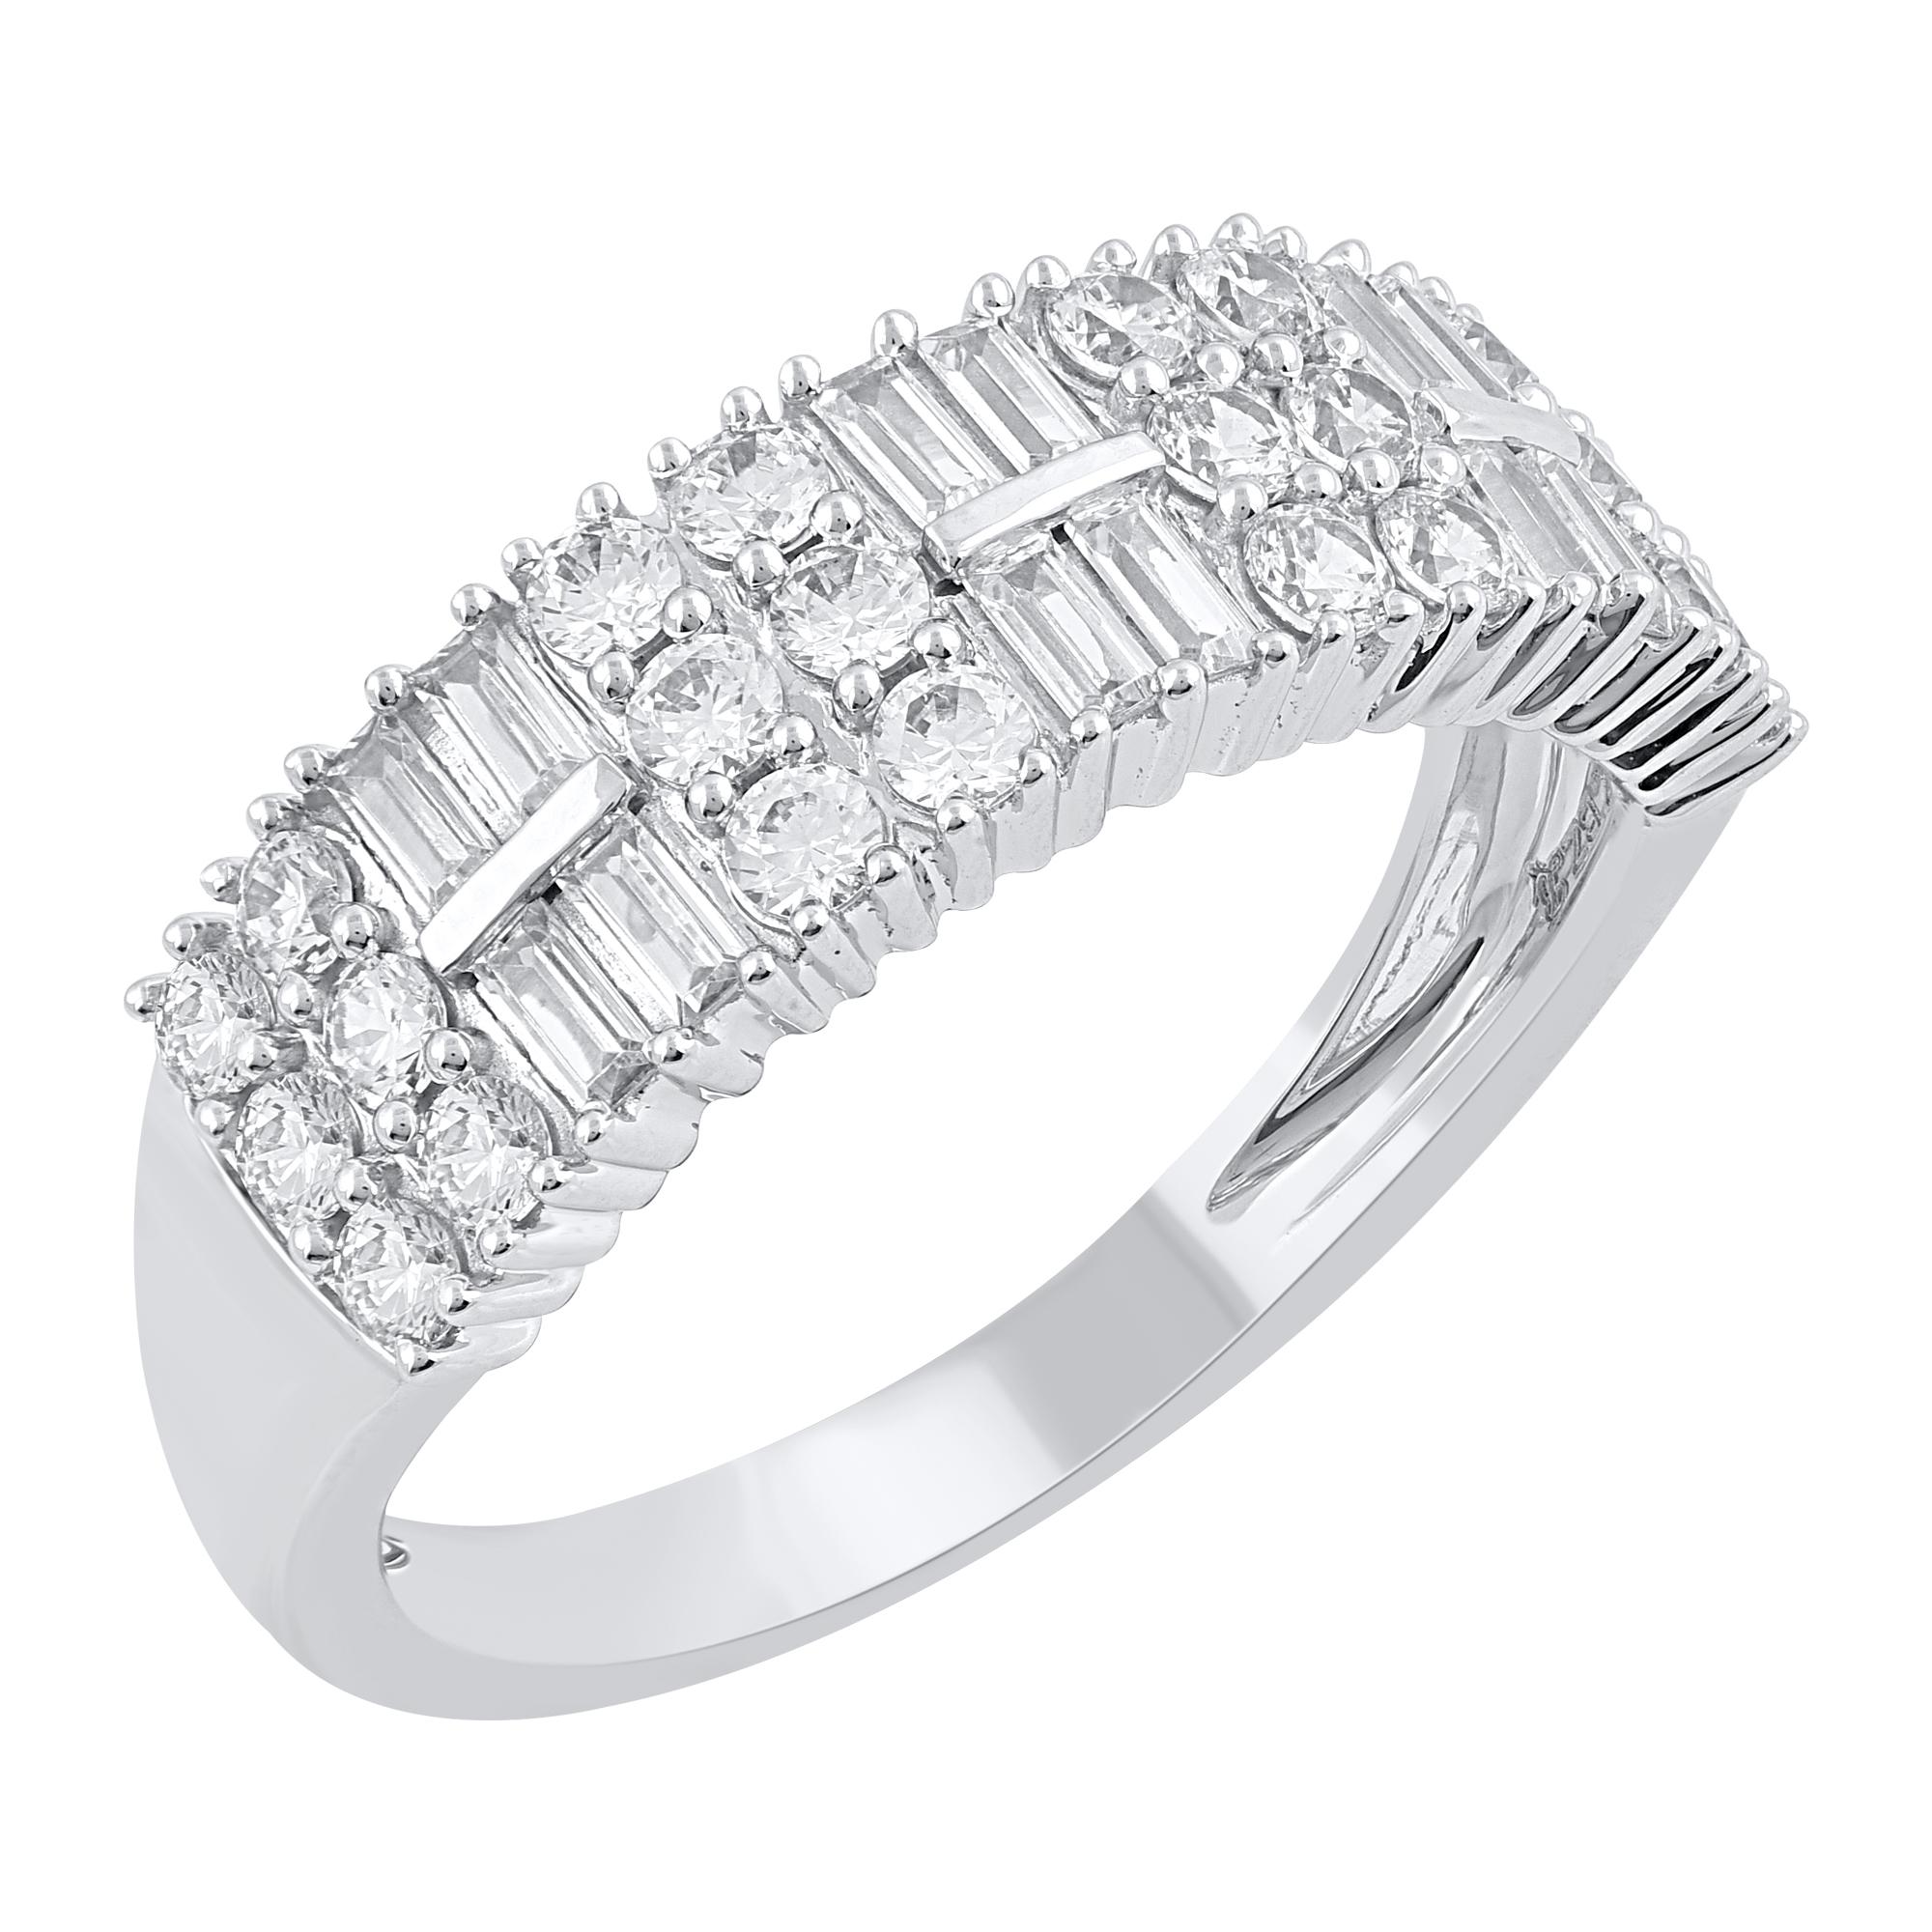 Complete your bridal look with a timeless design. These band rings crafted in 14 karat white gold with 36 brilliant cut & baguette natural diamonds in prong & channel setting. Total diamond weight is 1.0 carat. The white diamonds are graded as H-I